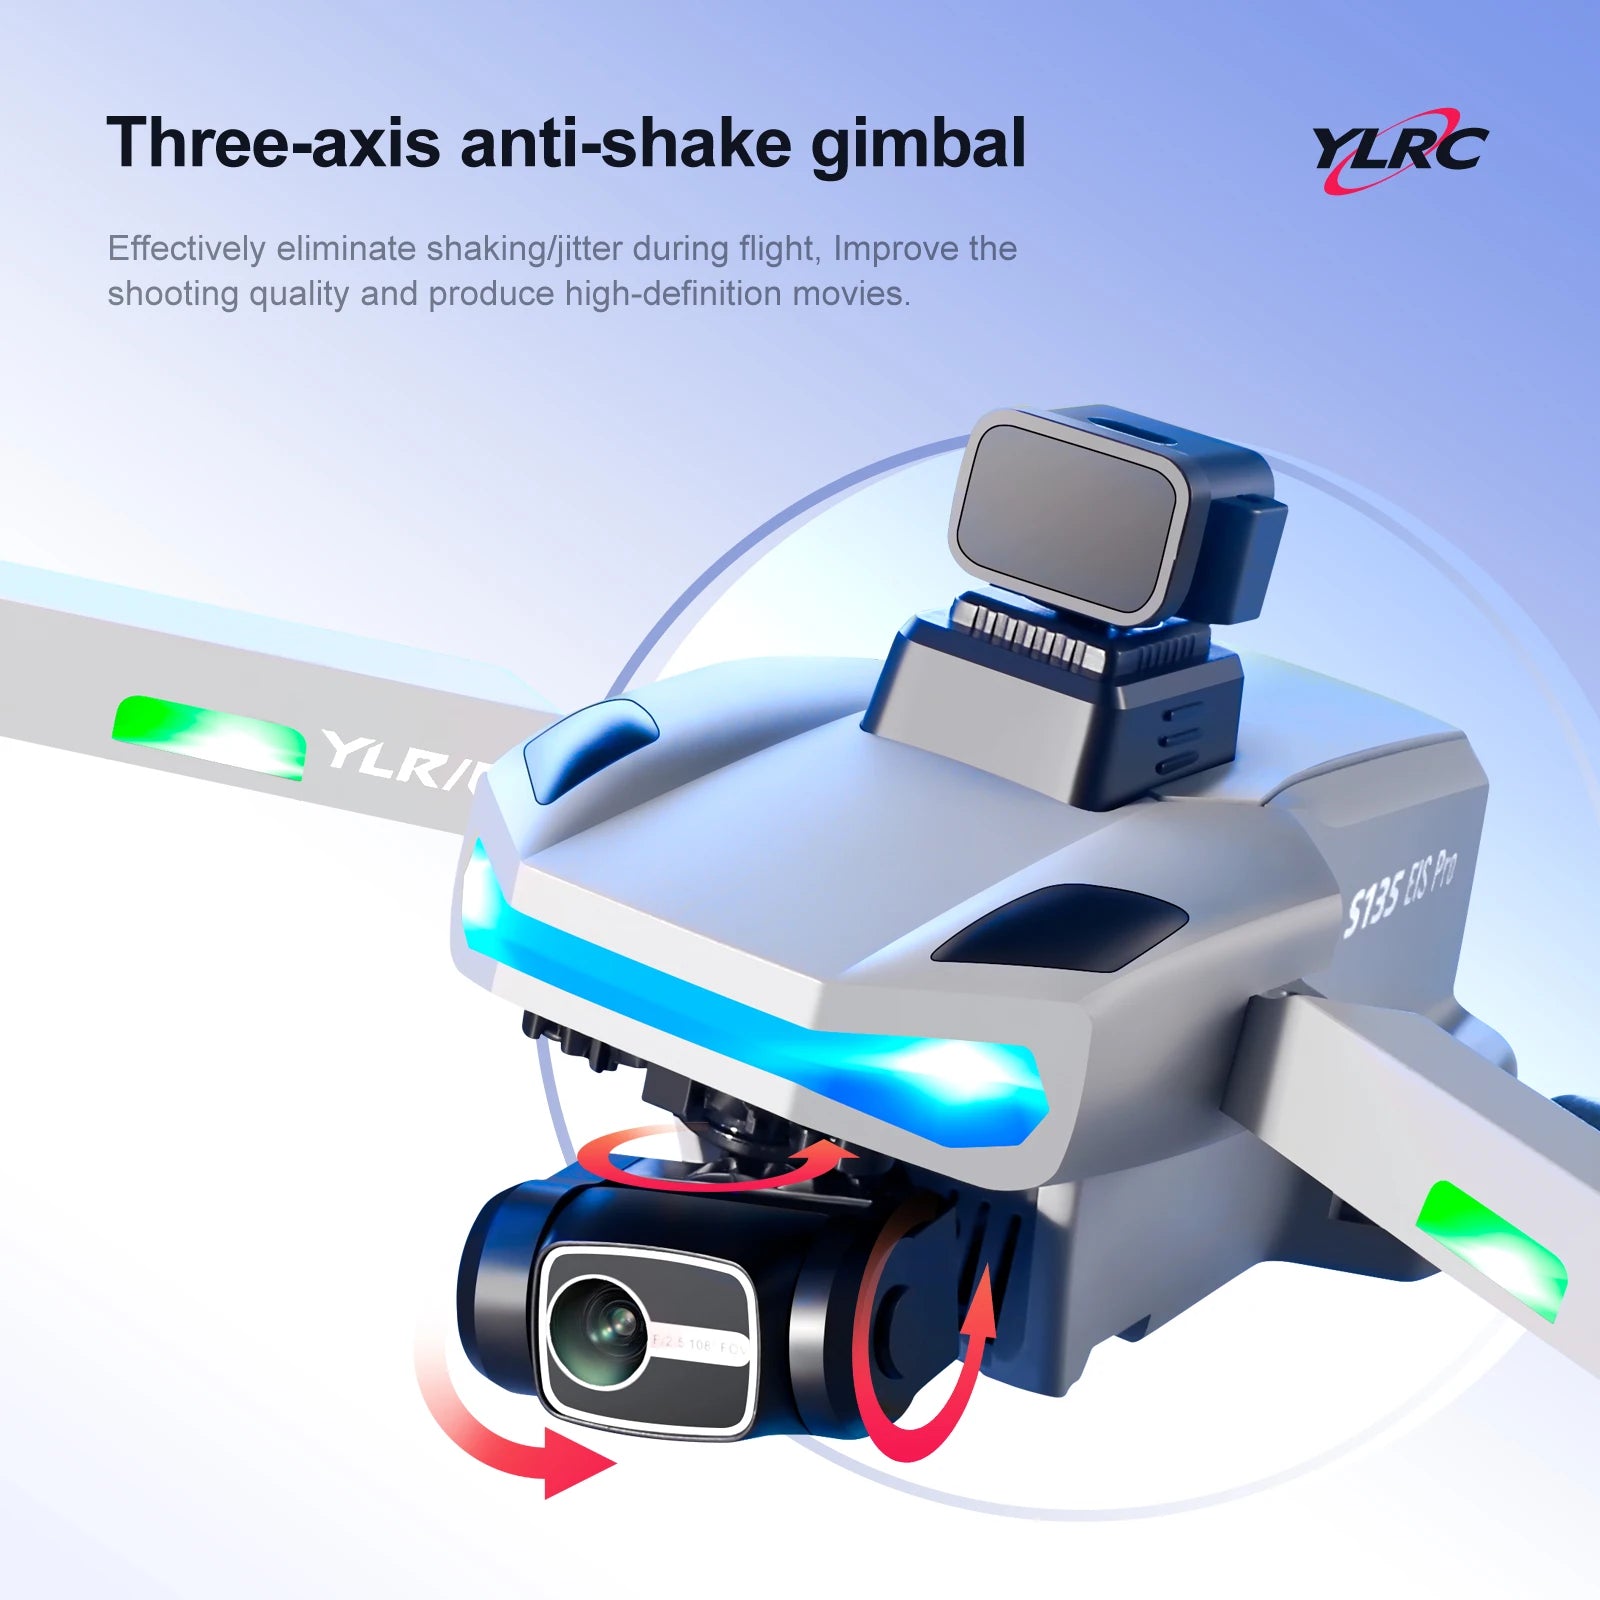 S135 Drone, three-axis anti-shake gimbal YLRC Effectively eliminate shaking